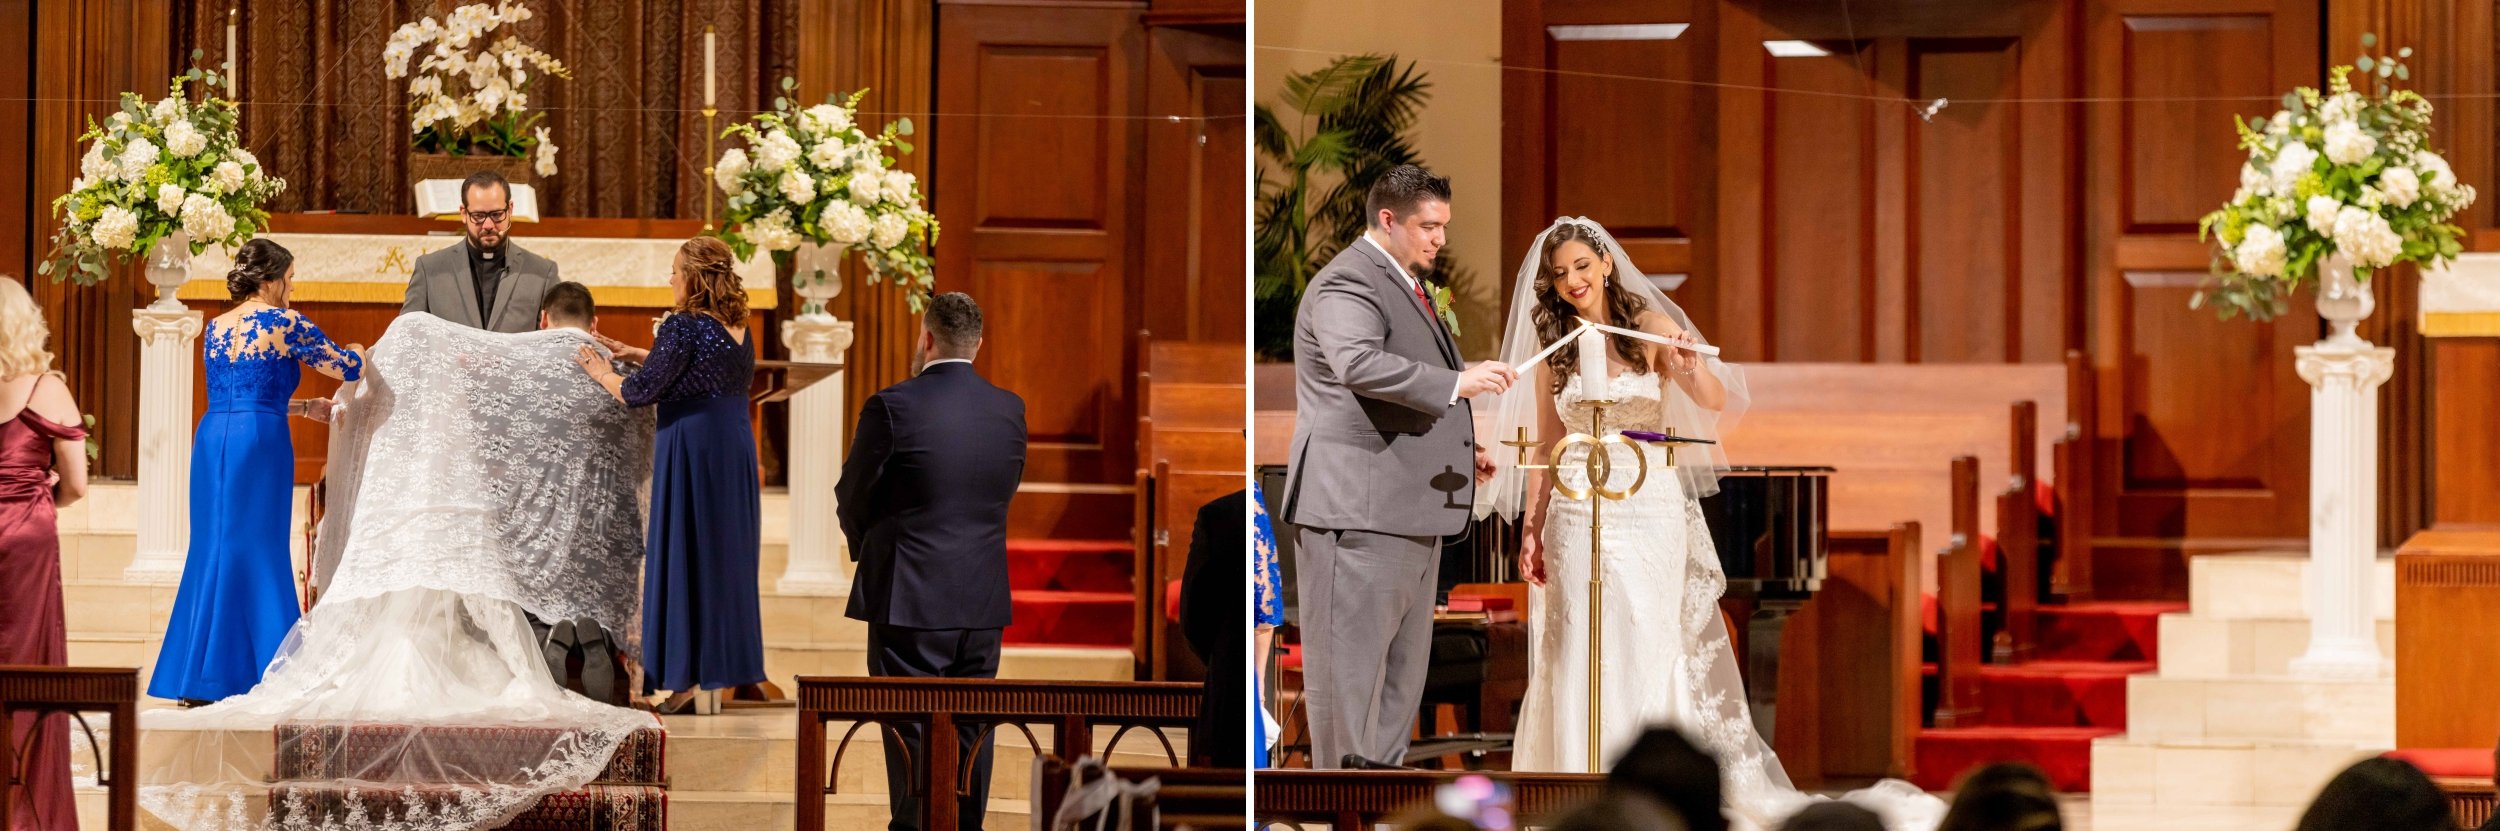 Wedding FIRST UNITED METHODIST CHURCH OF CORAL GABLES - Photography by Santy Martinez 27.jpg